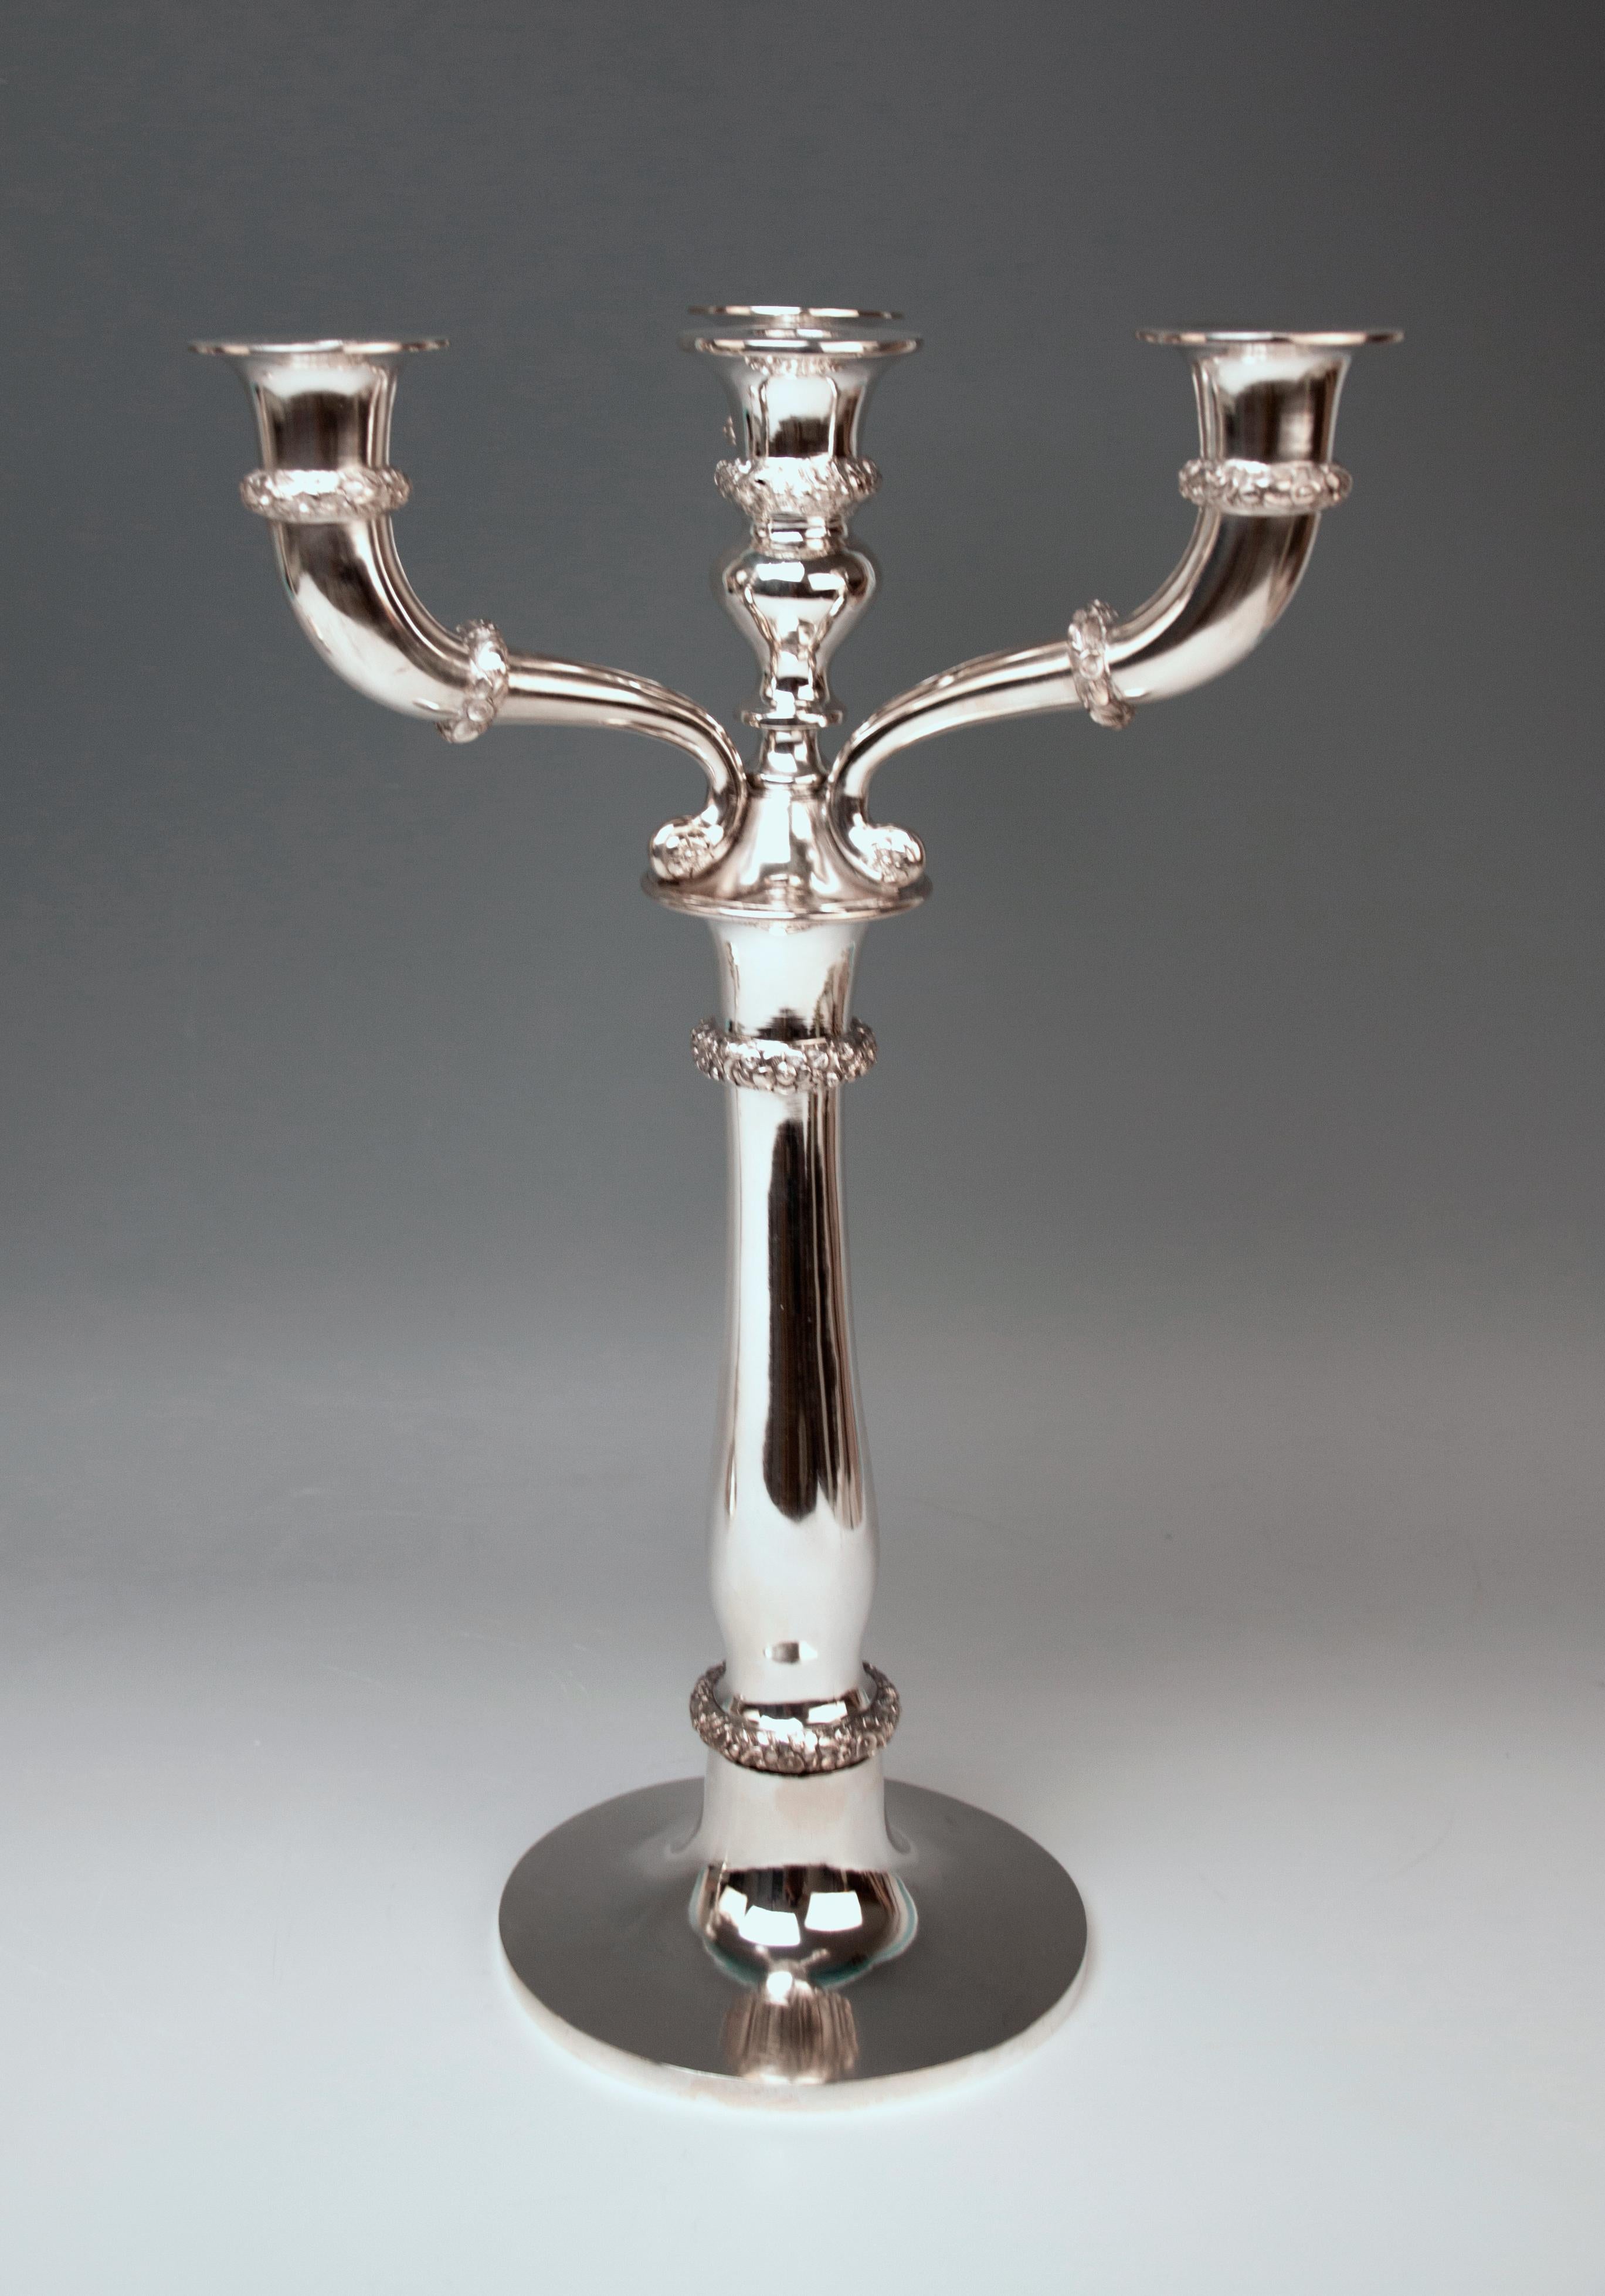 Austrian excellent Biedermeier silver pair of candlesticks / candelabras, made 1829.

Very interesting Viennese silver pair of candlesticks of finest manufacturing quality as well as of elegant appearance. These candlesticks were made during